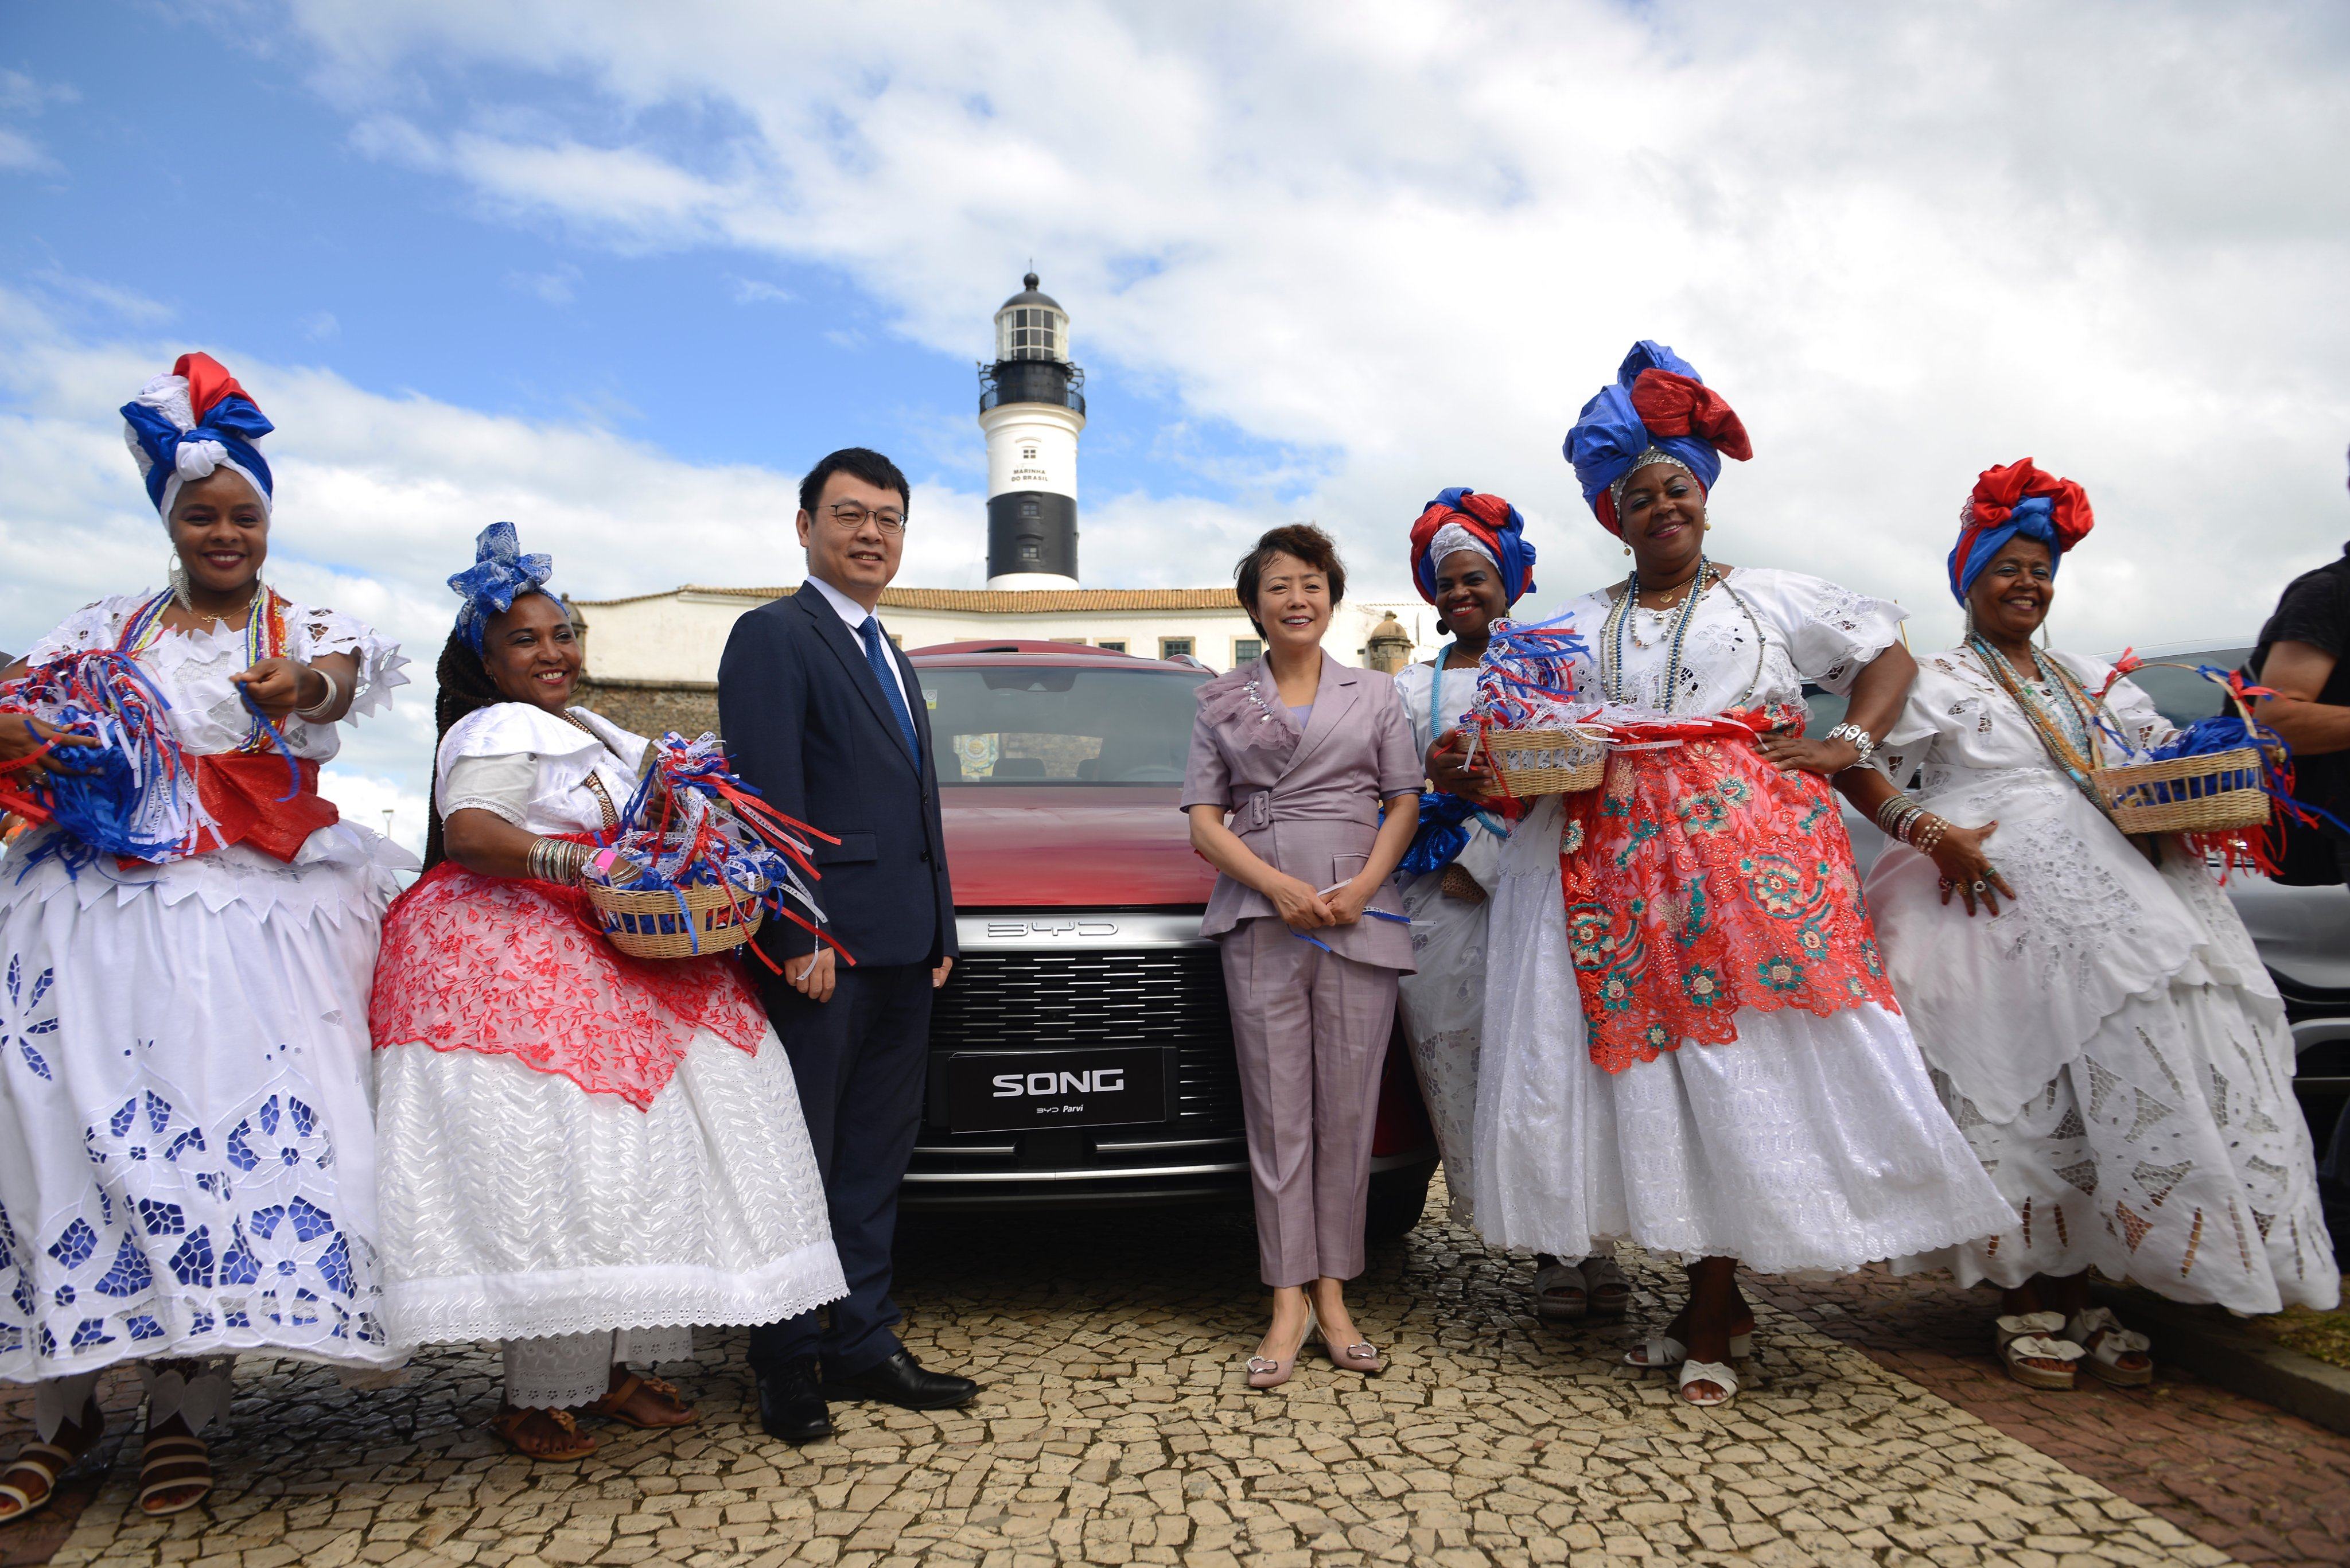 BYD executives Tyler Li and Stella Li pose in Bahia state in Brazil as the Chinese car and battery company announces new plants in the country in July. Photo: BYD